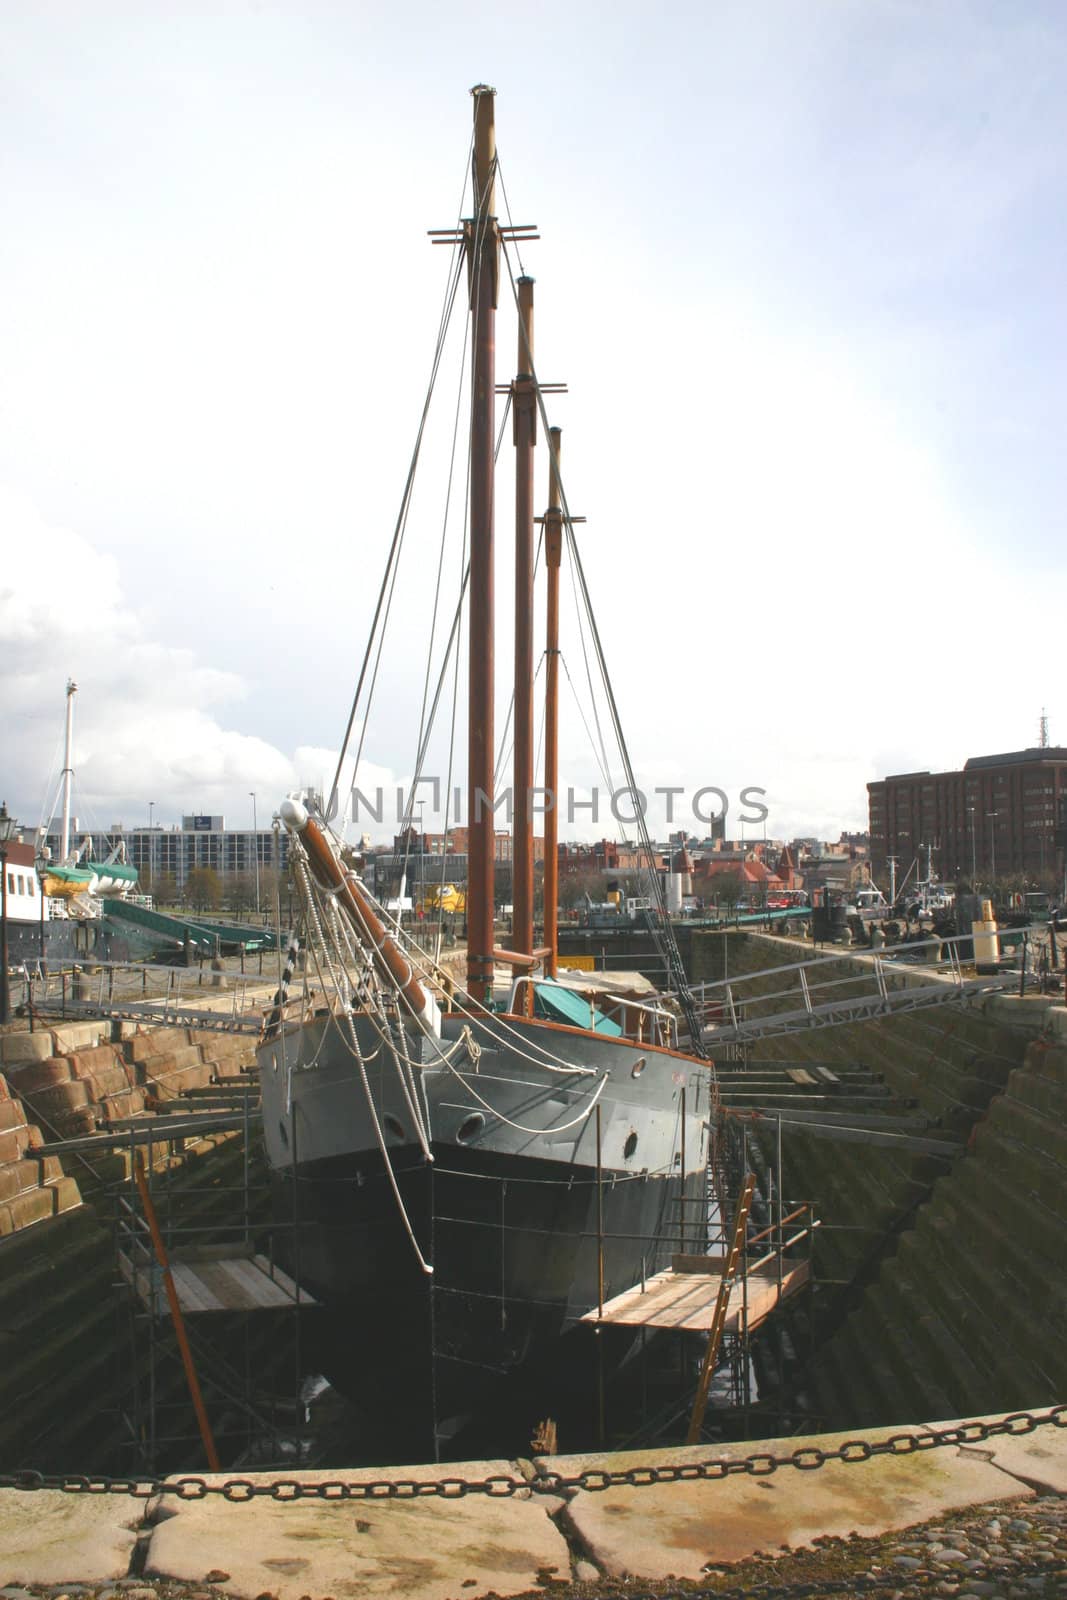 Old Sailing Ship in Liverpool Dry Dock 